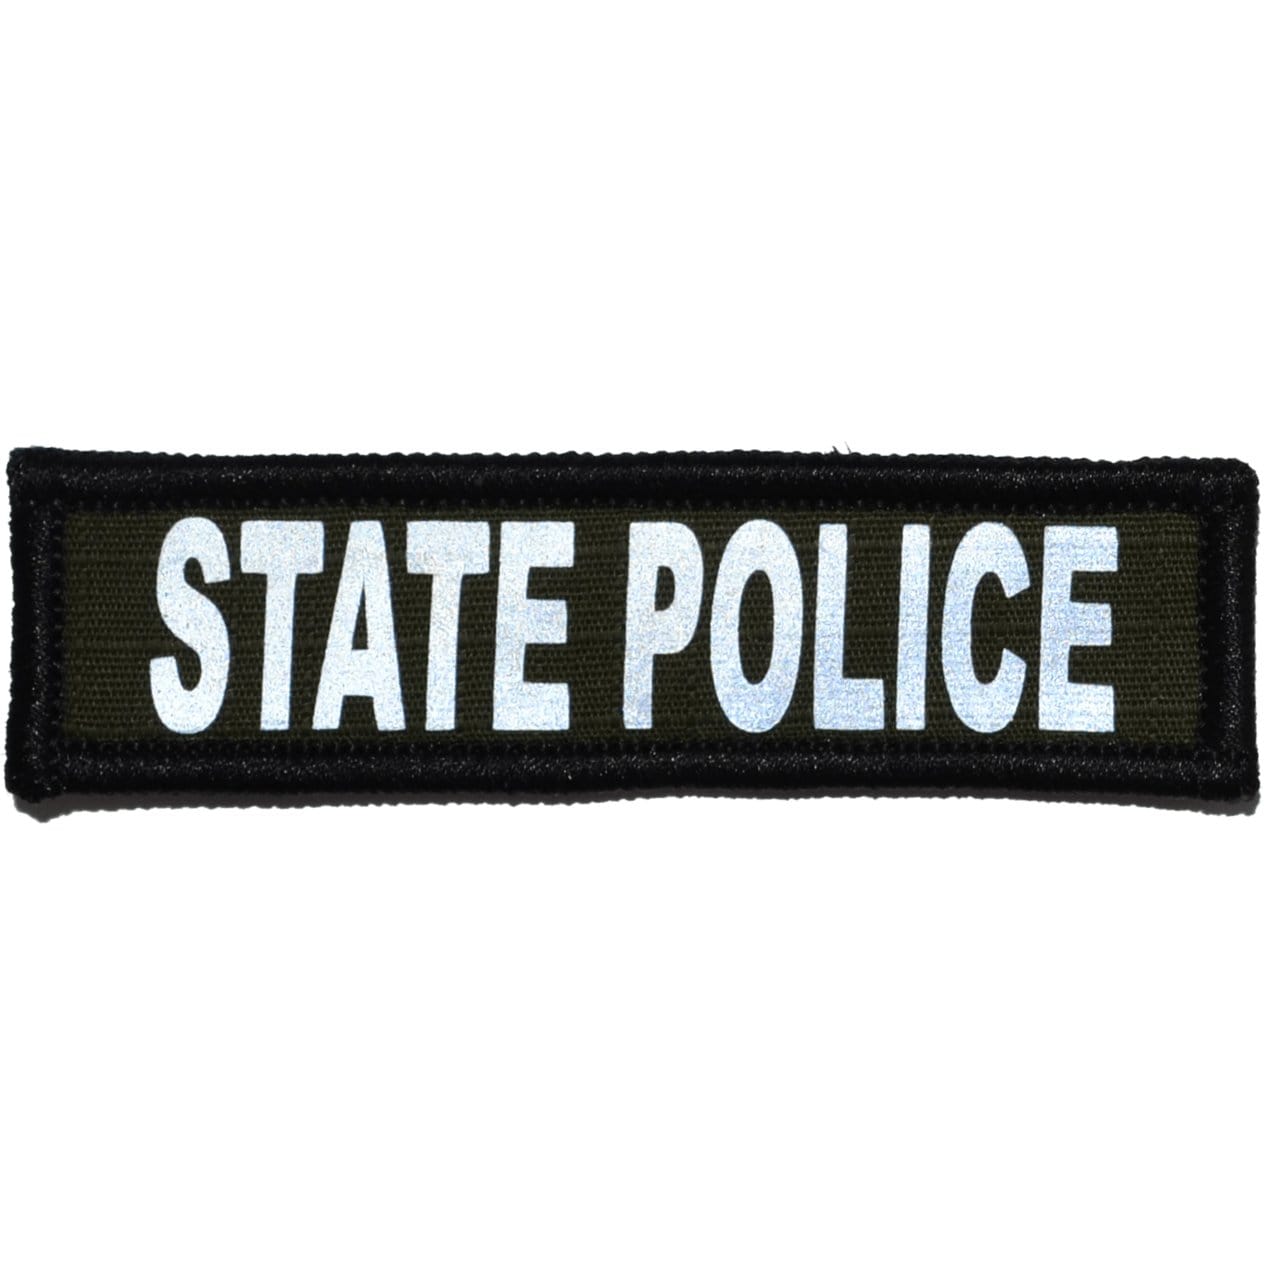 Tactical Gear Junkie Patches Olive Drab State Police Reflective - 1x3.75 Patch